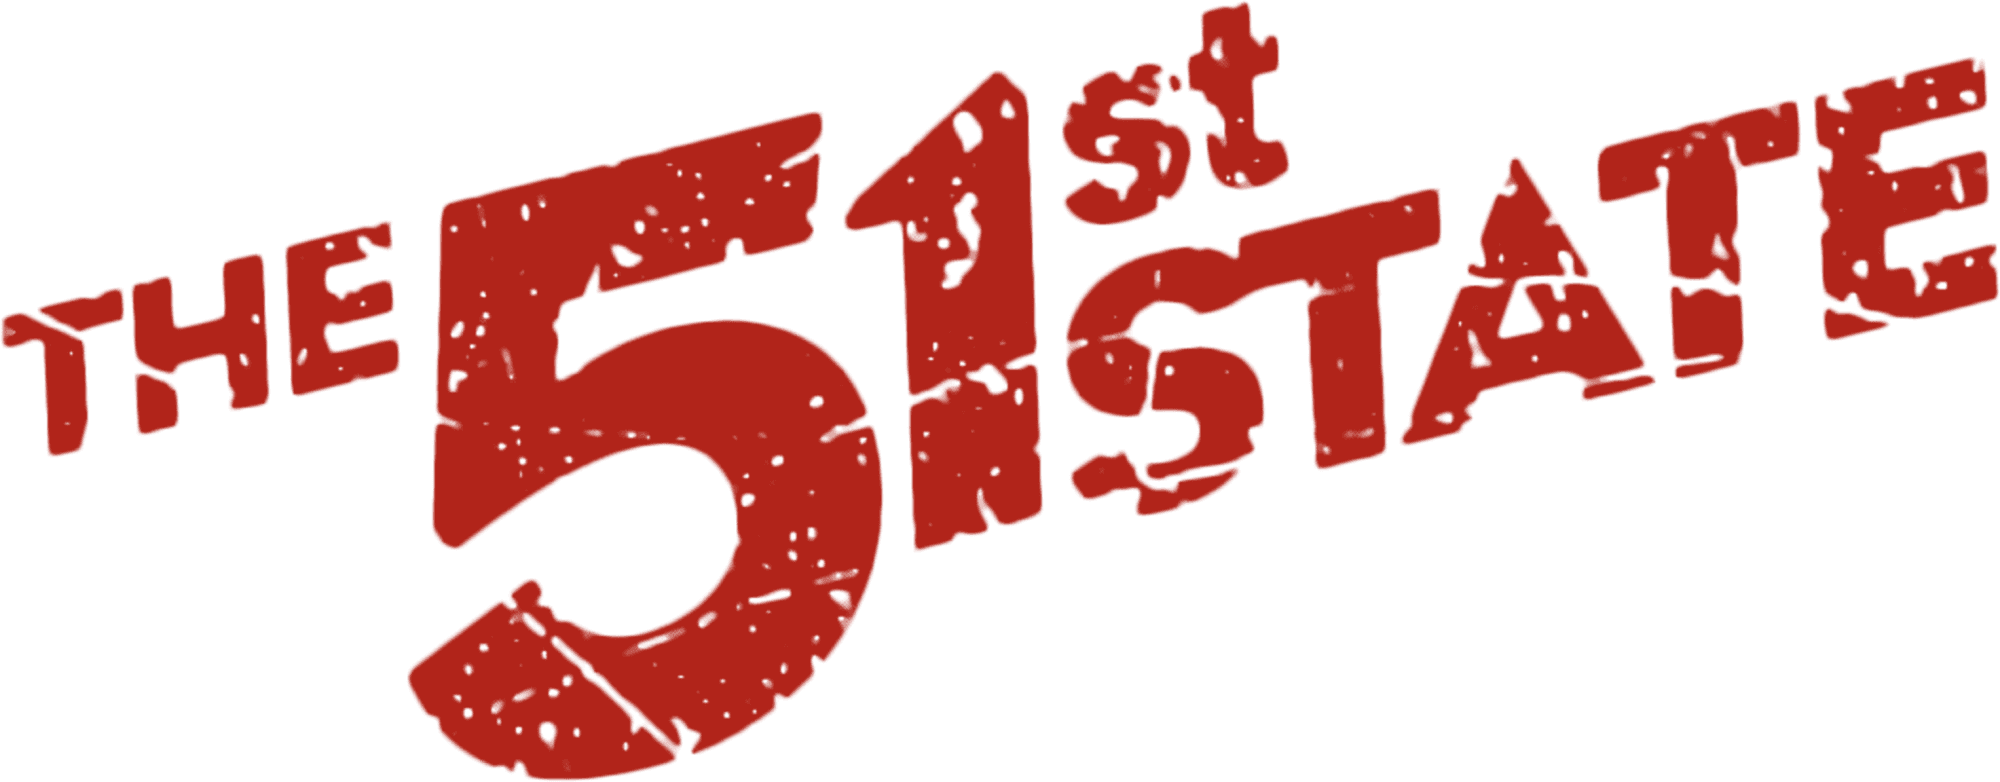 The 51st State logo